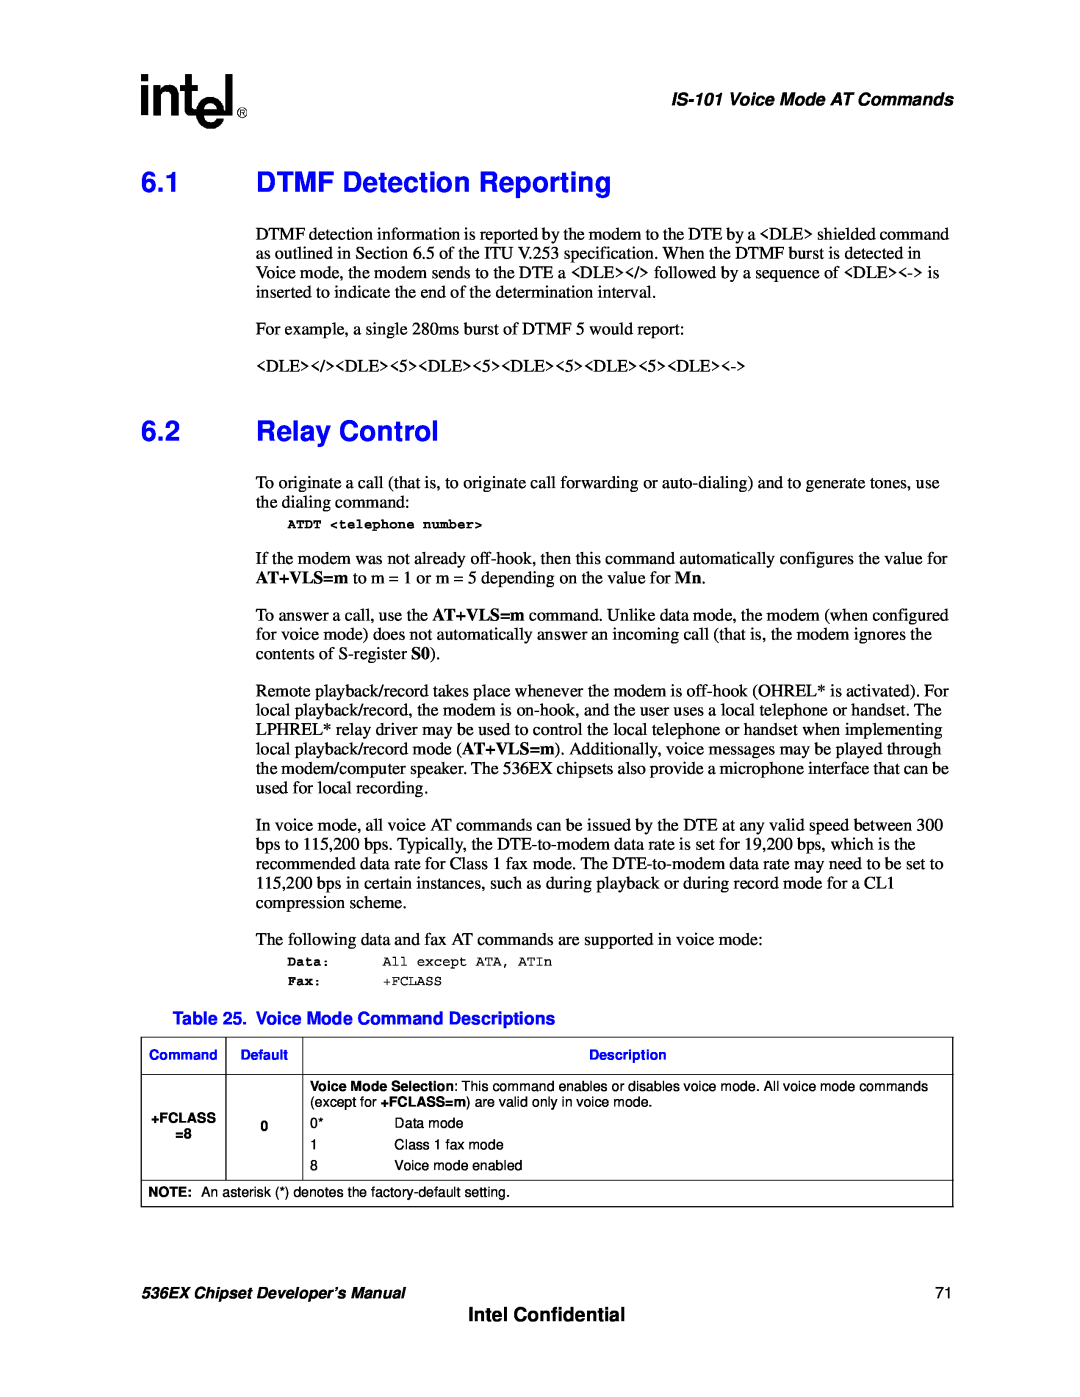 Intel 536EX manual 6.1DTMF Detection Reporting, 6.2Relay Control, Intel Confidential, IS-101Voice Mode AT Commands 